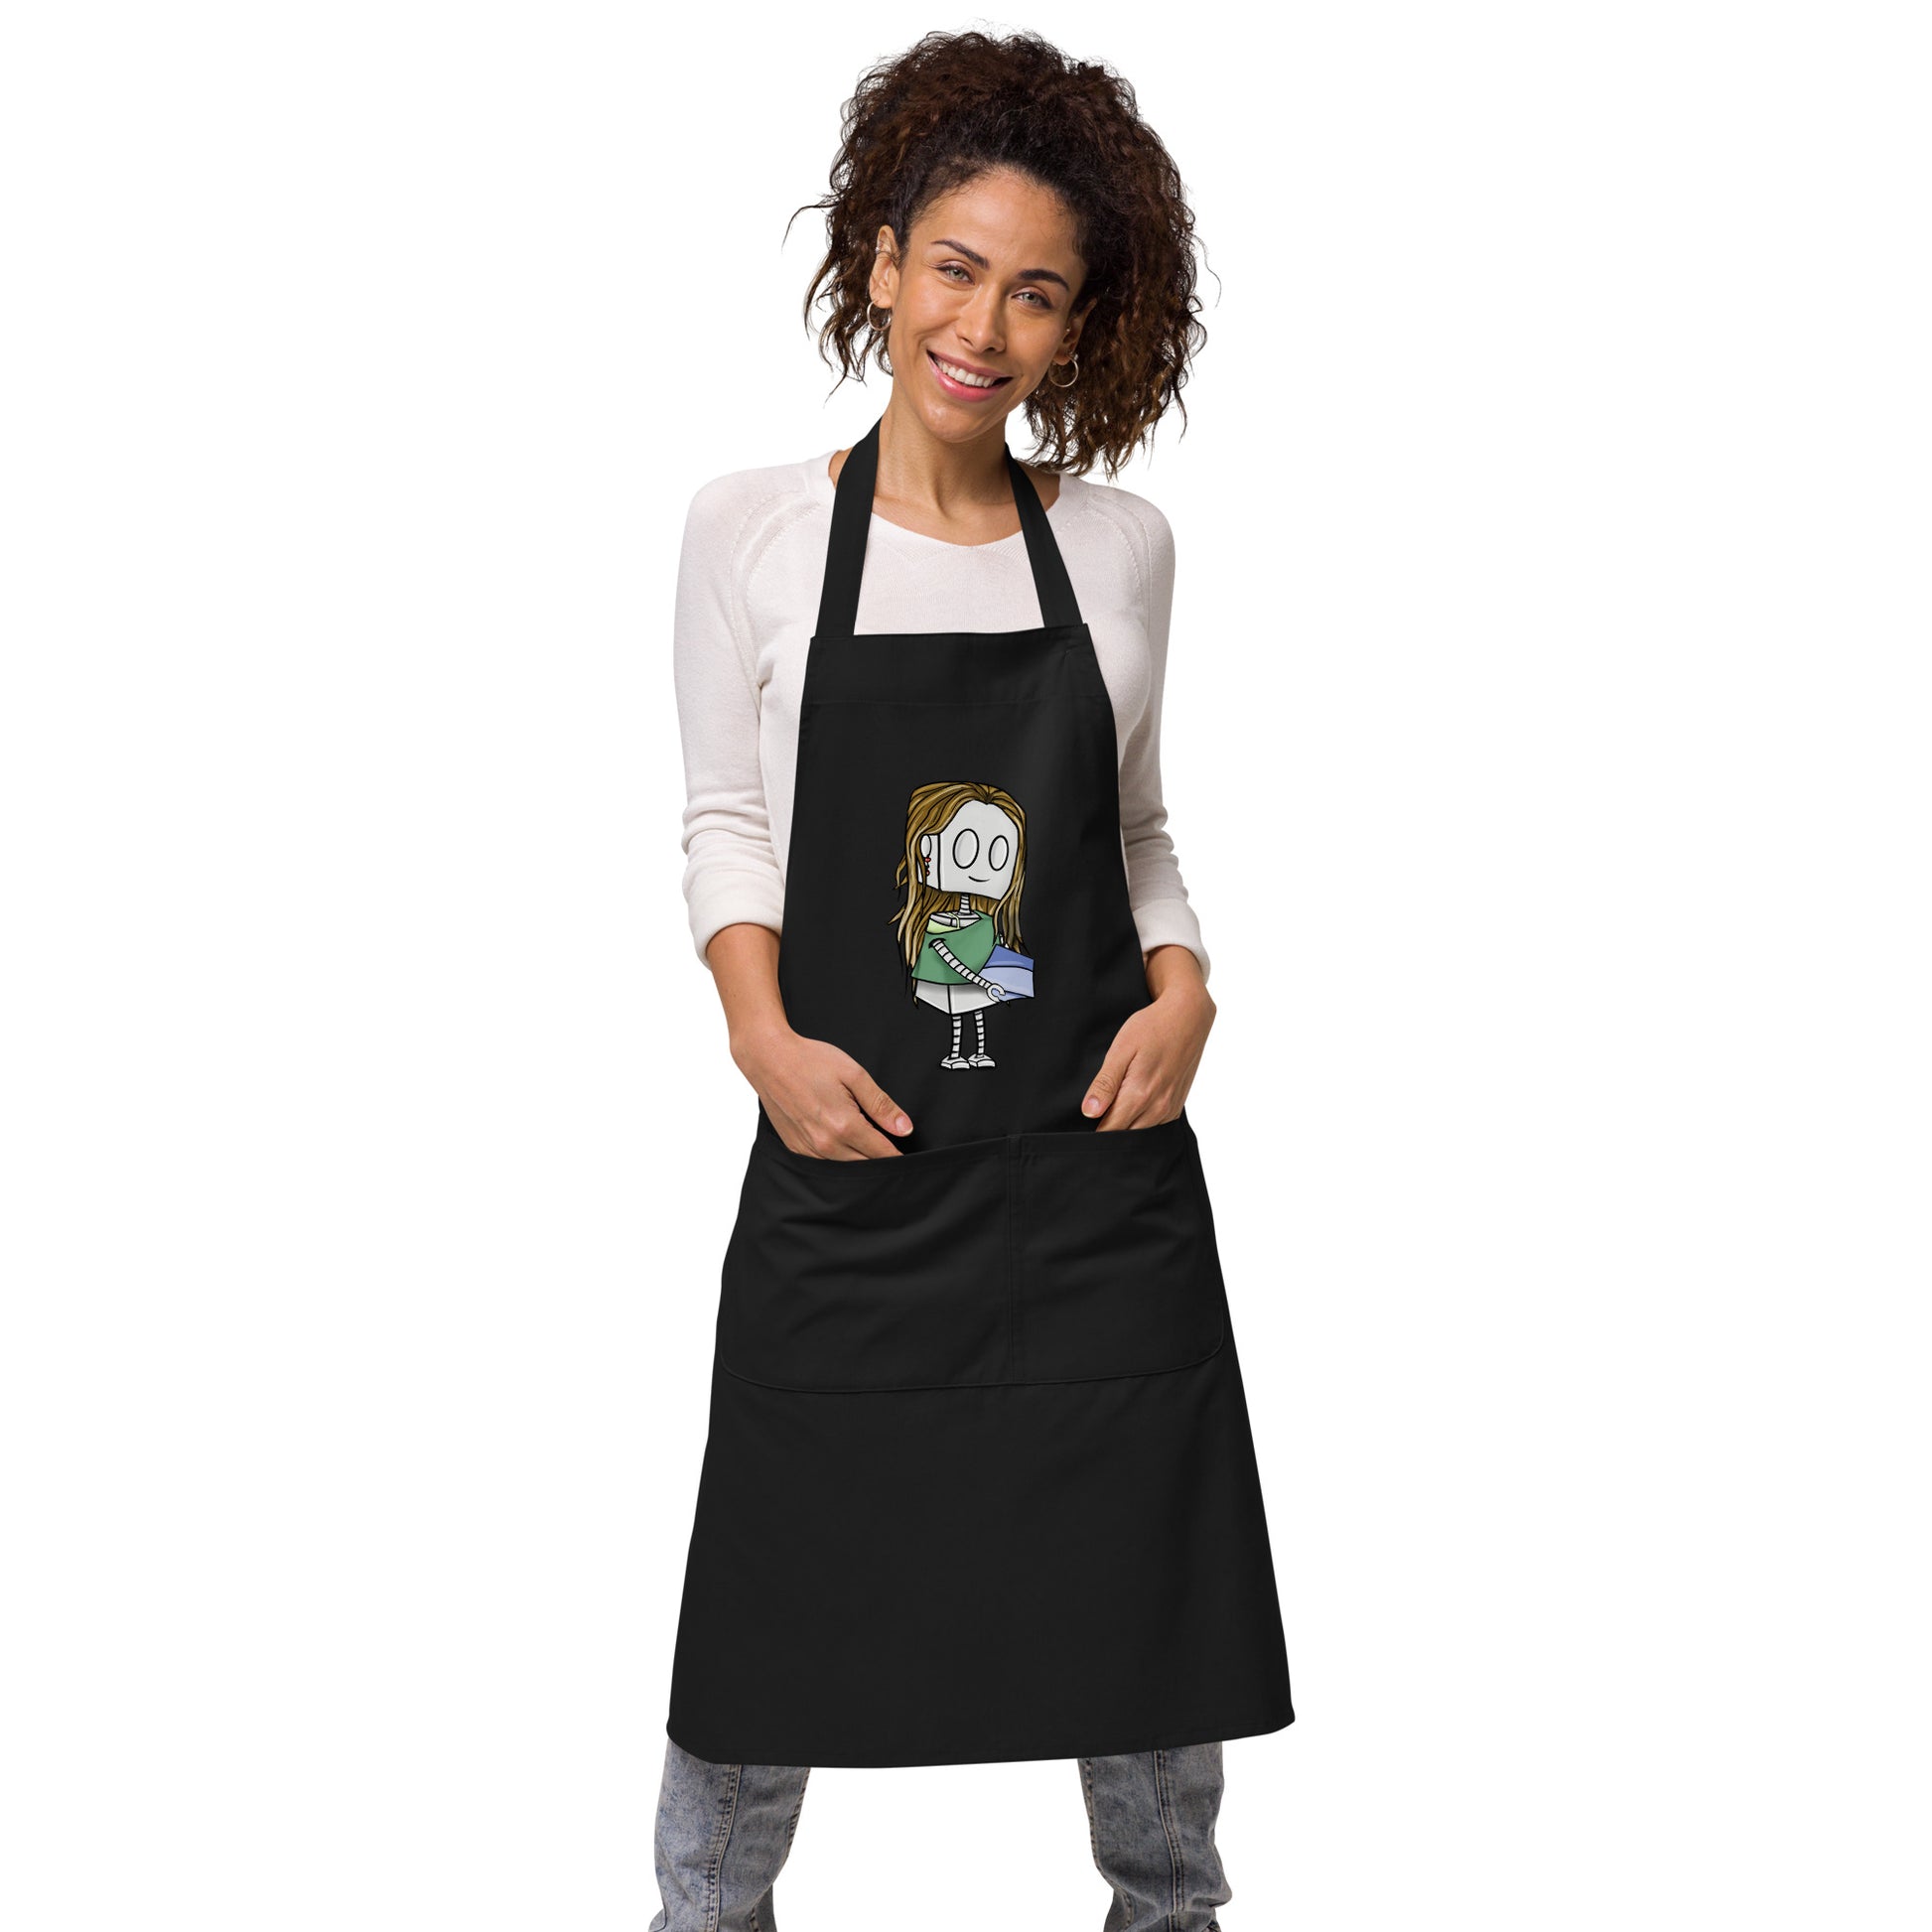 Adorable Robot Cooking & Pottery Apron (Pottery Lover) – Dan